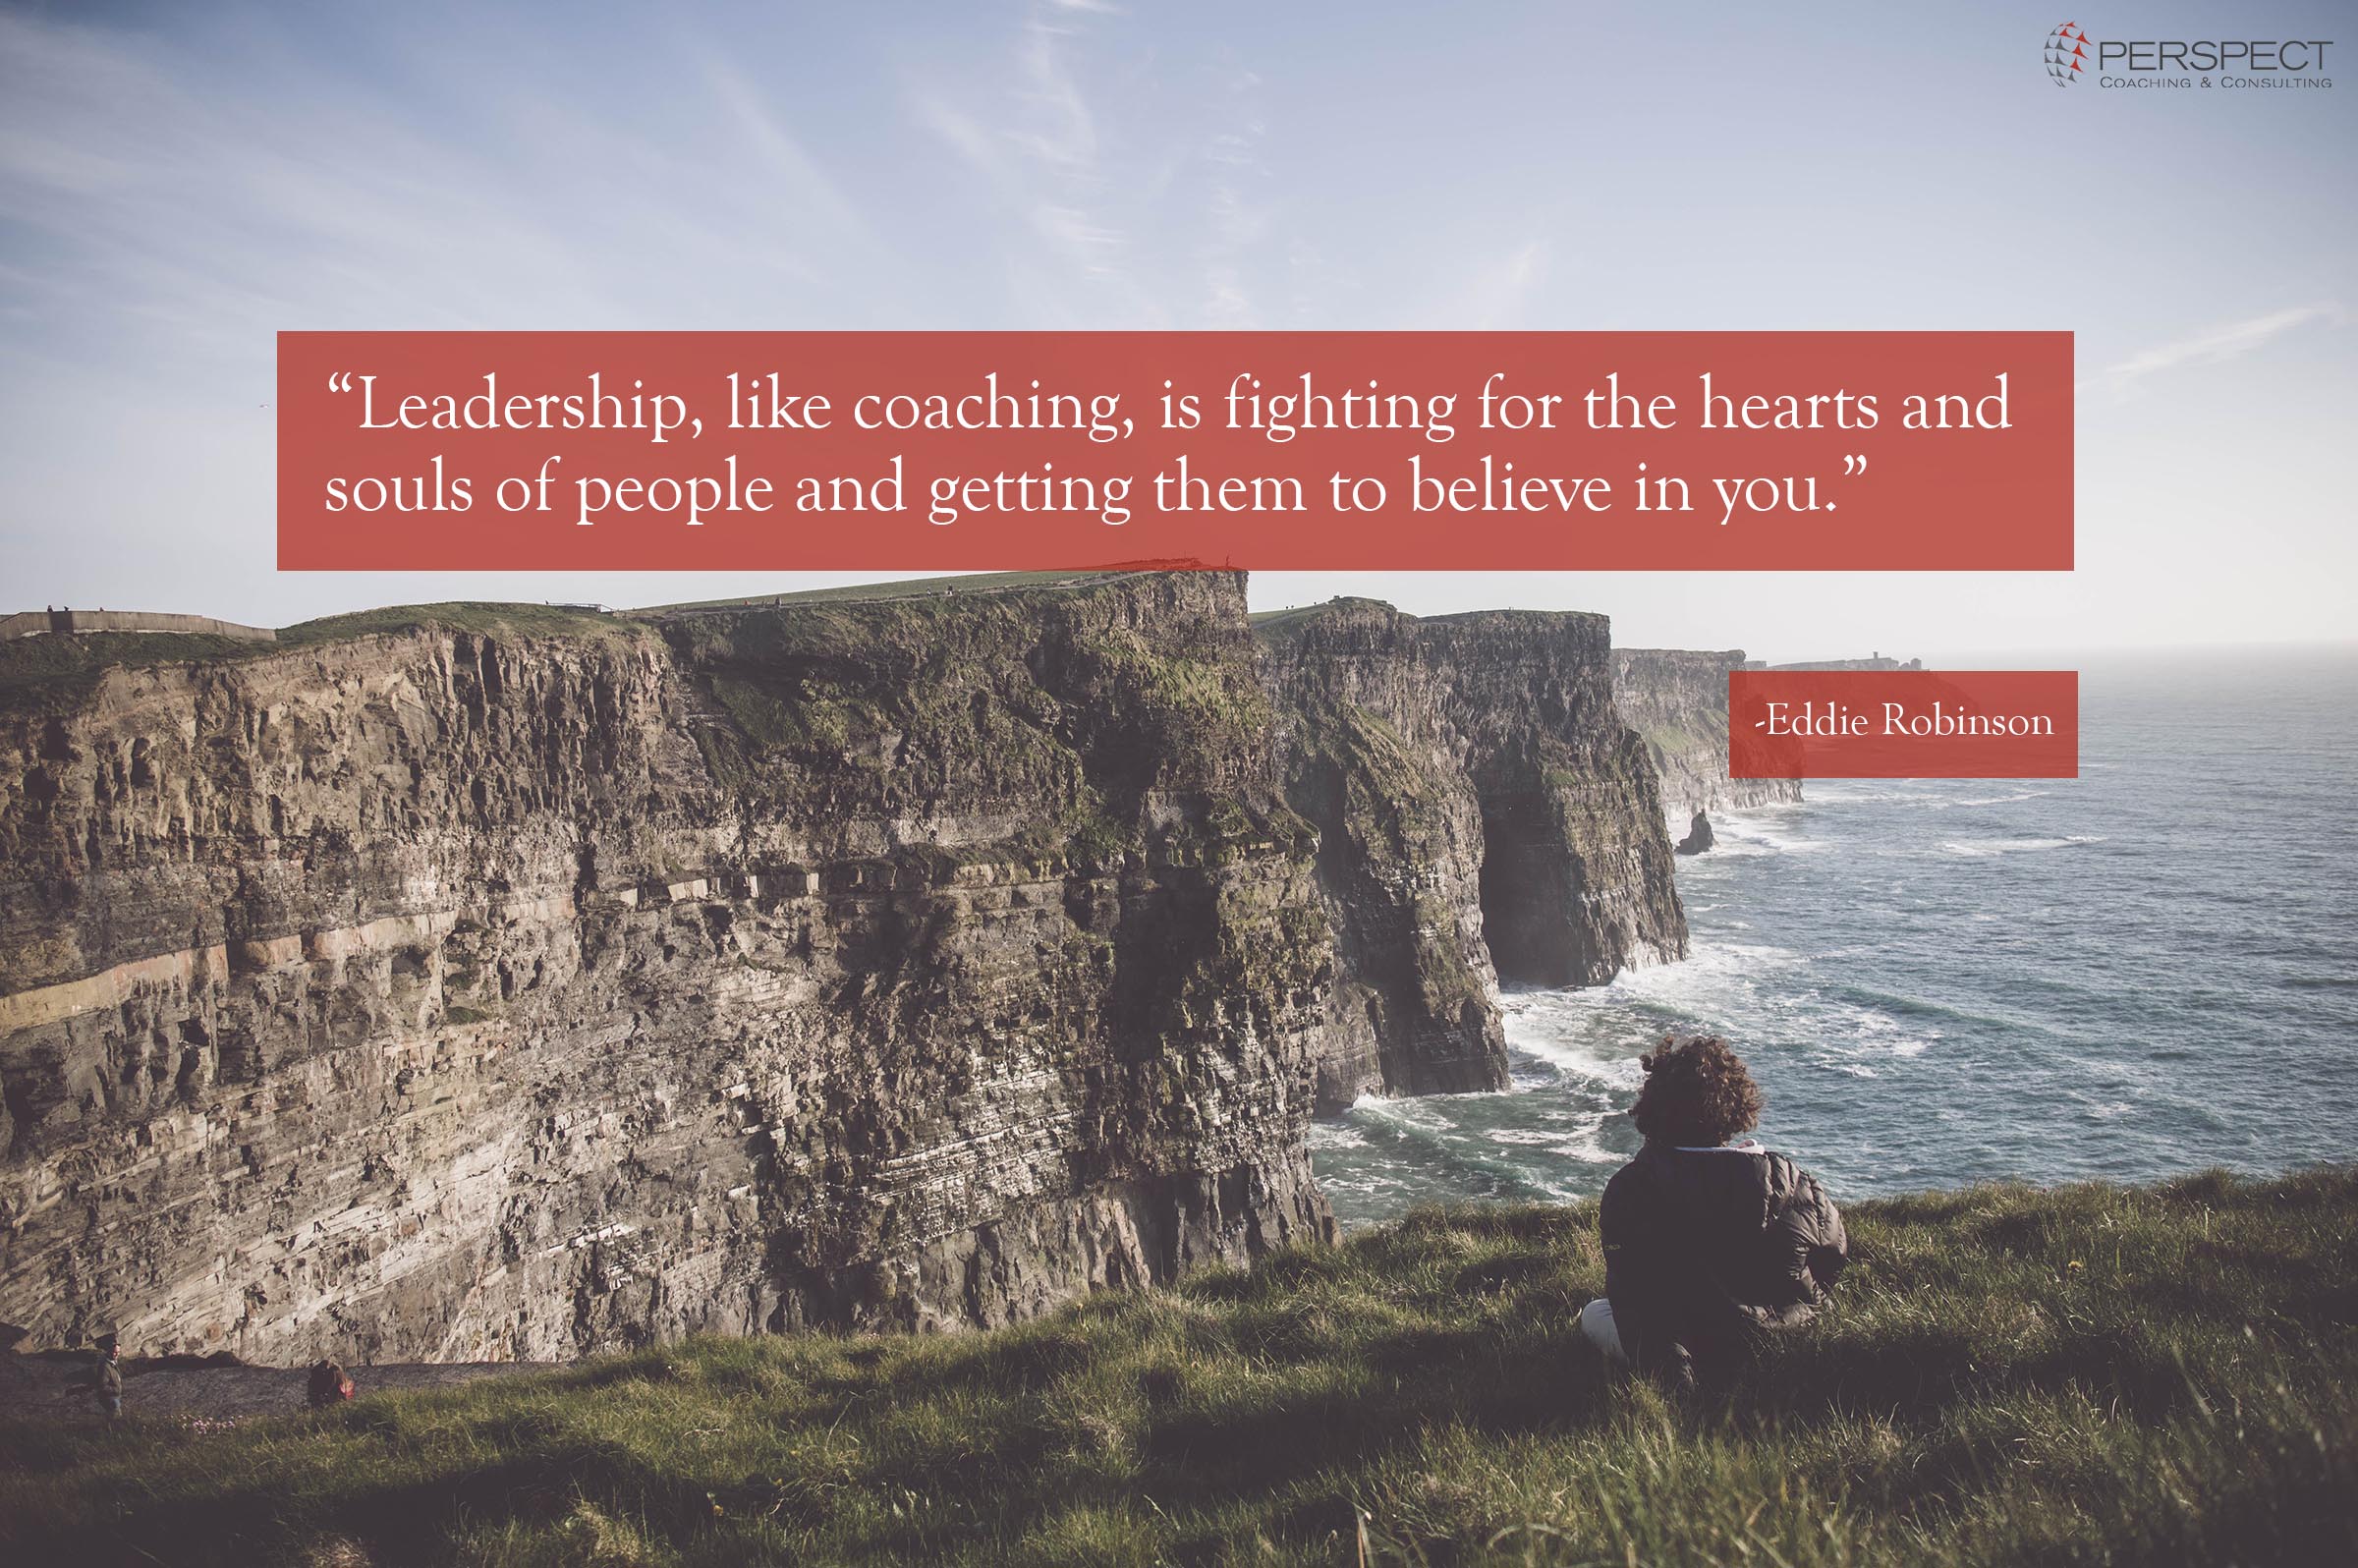 Leadership, like coaching, is fighting for the hearts and souls of people and getting them to believe in you